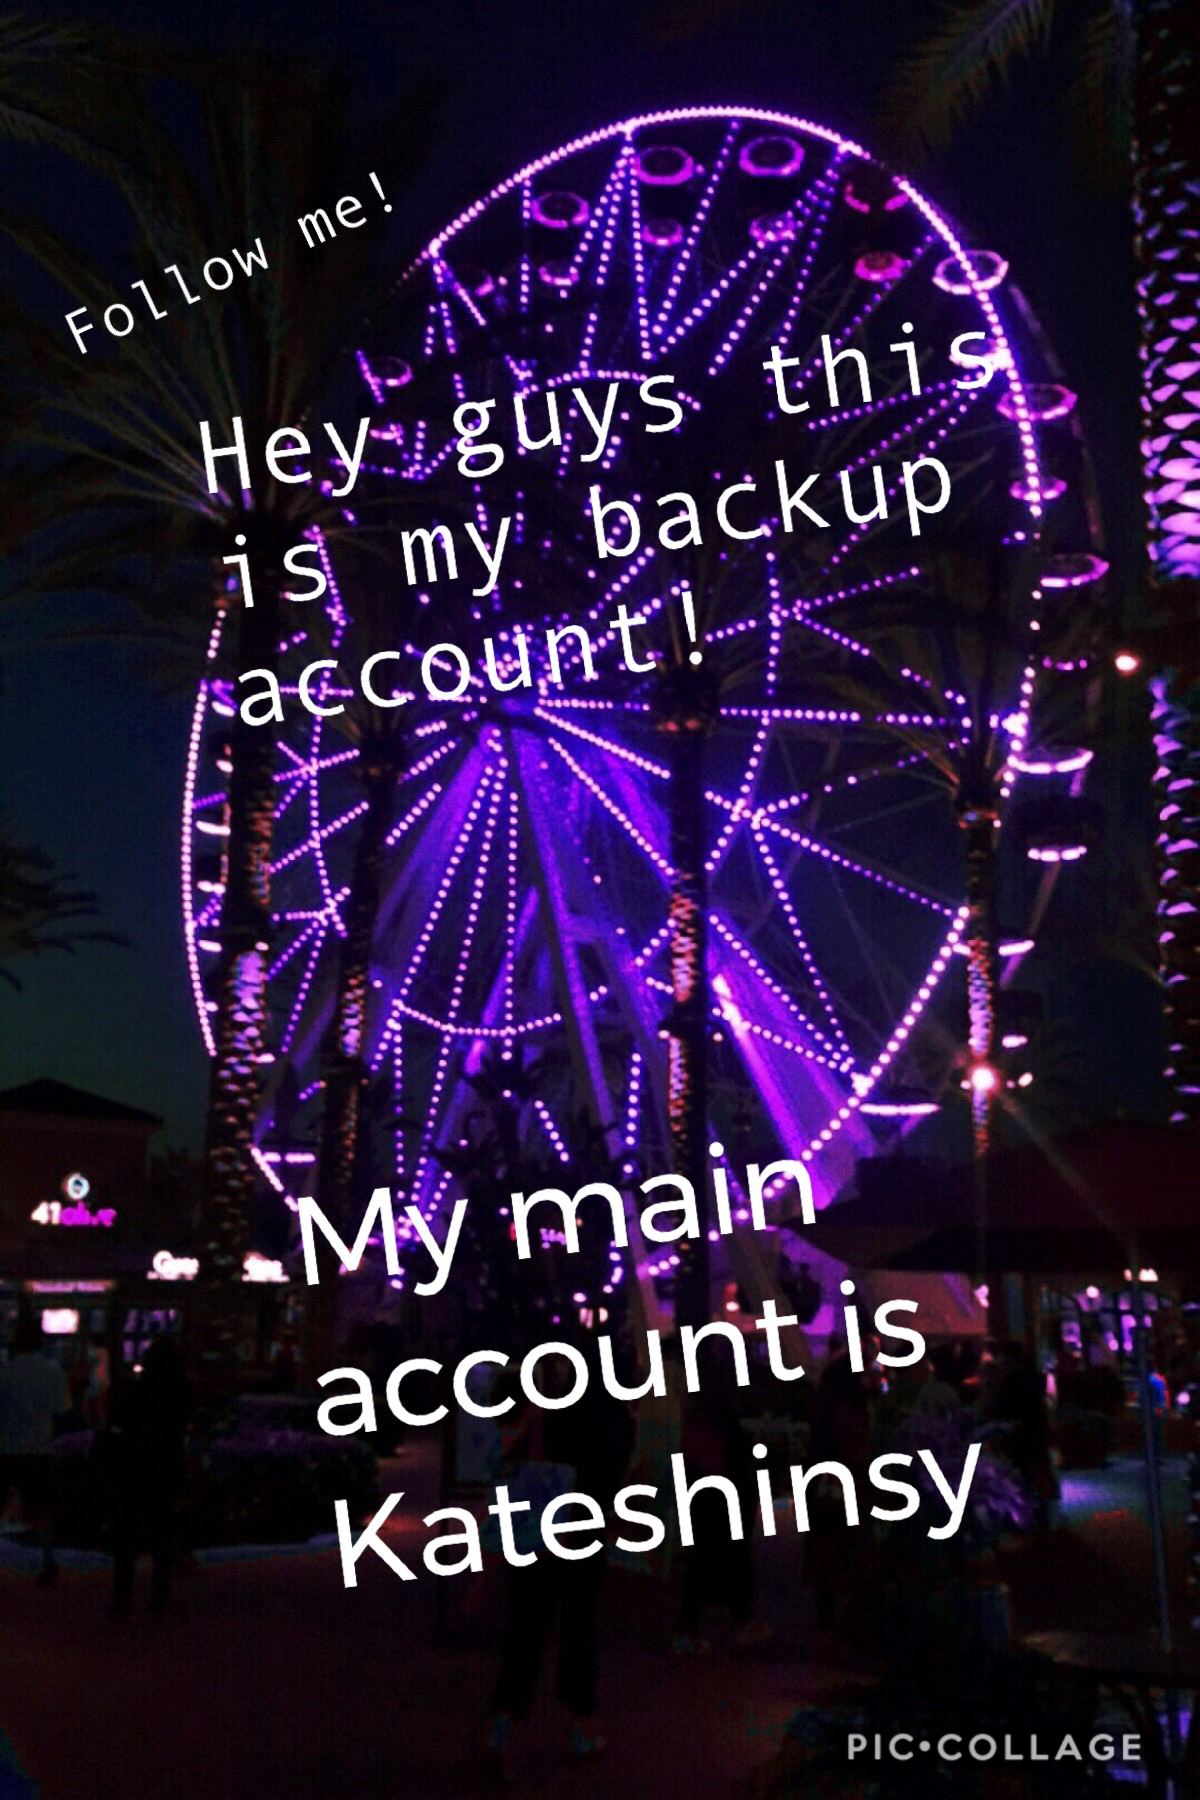 THis is my backup account! 